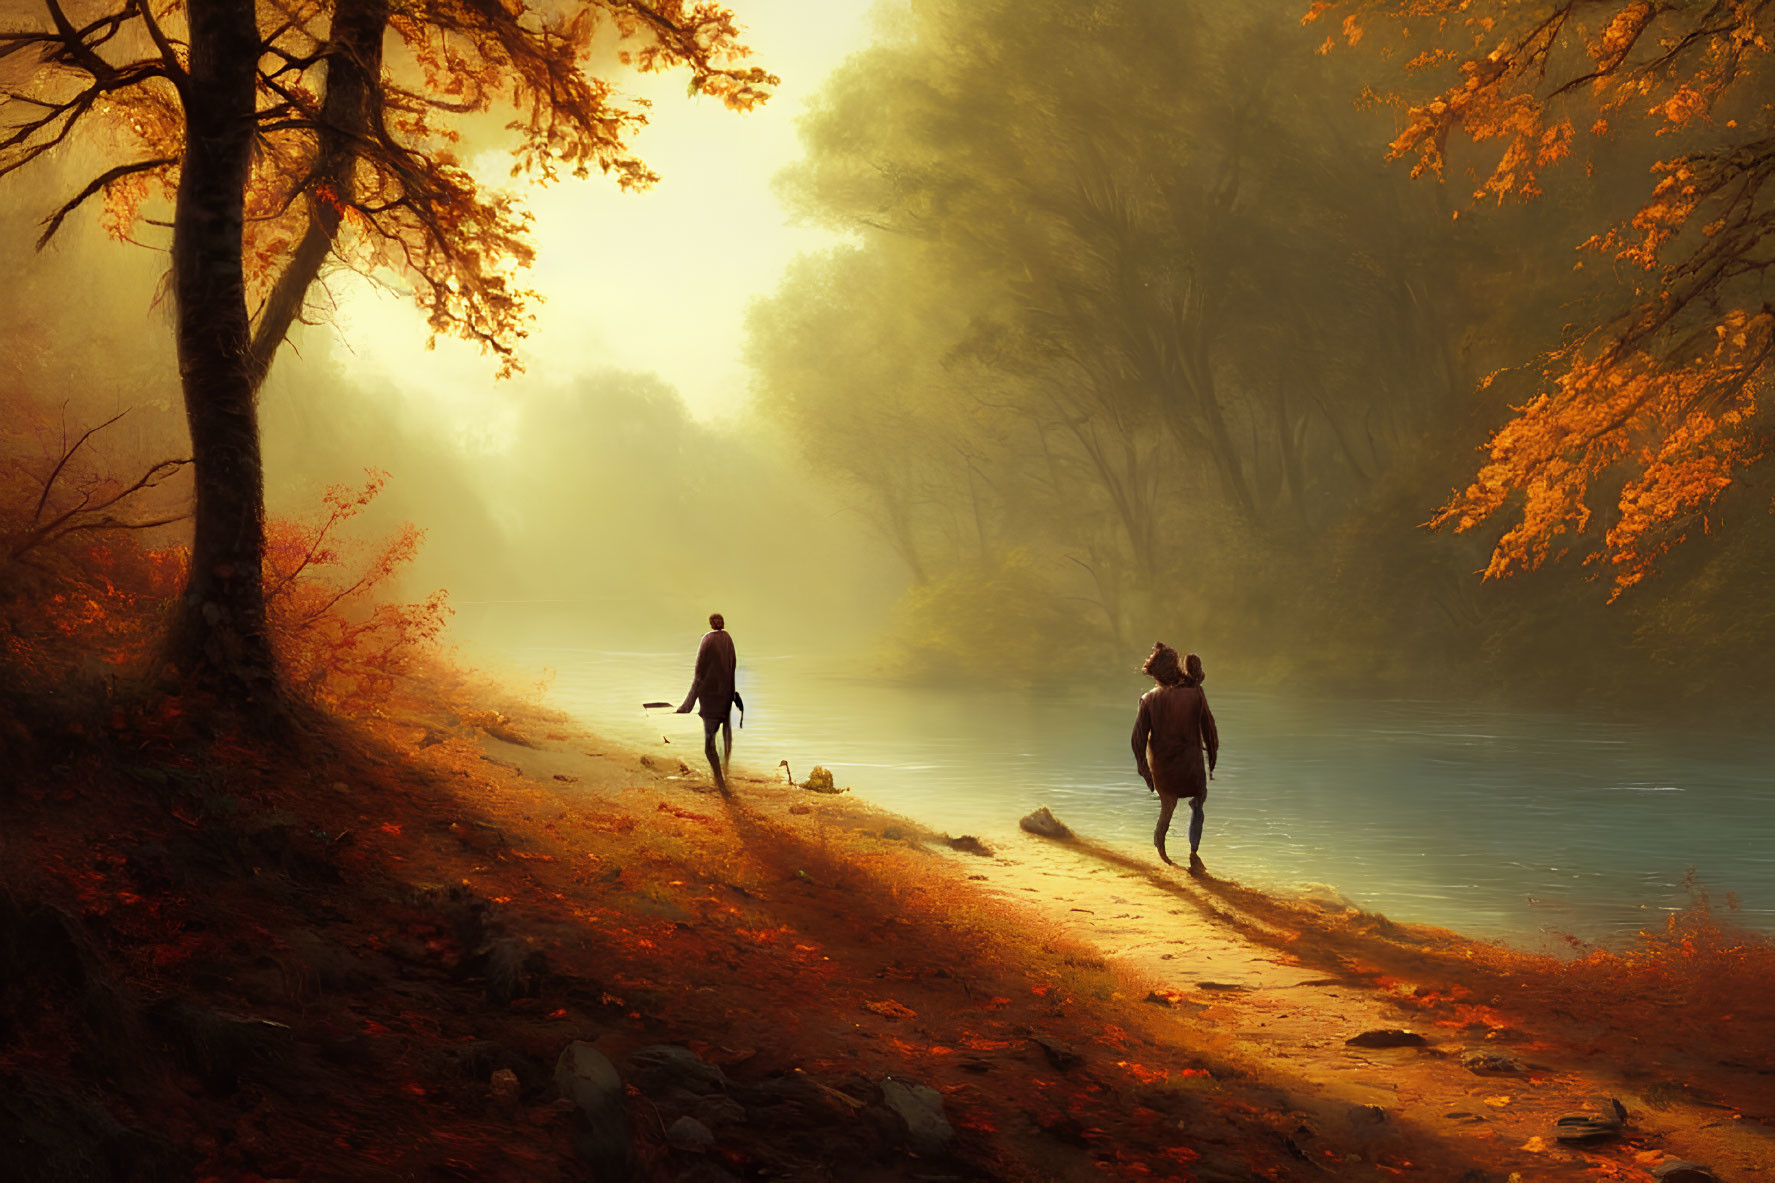 Tranquil autumn river scene with person and horse in misty sunlight